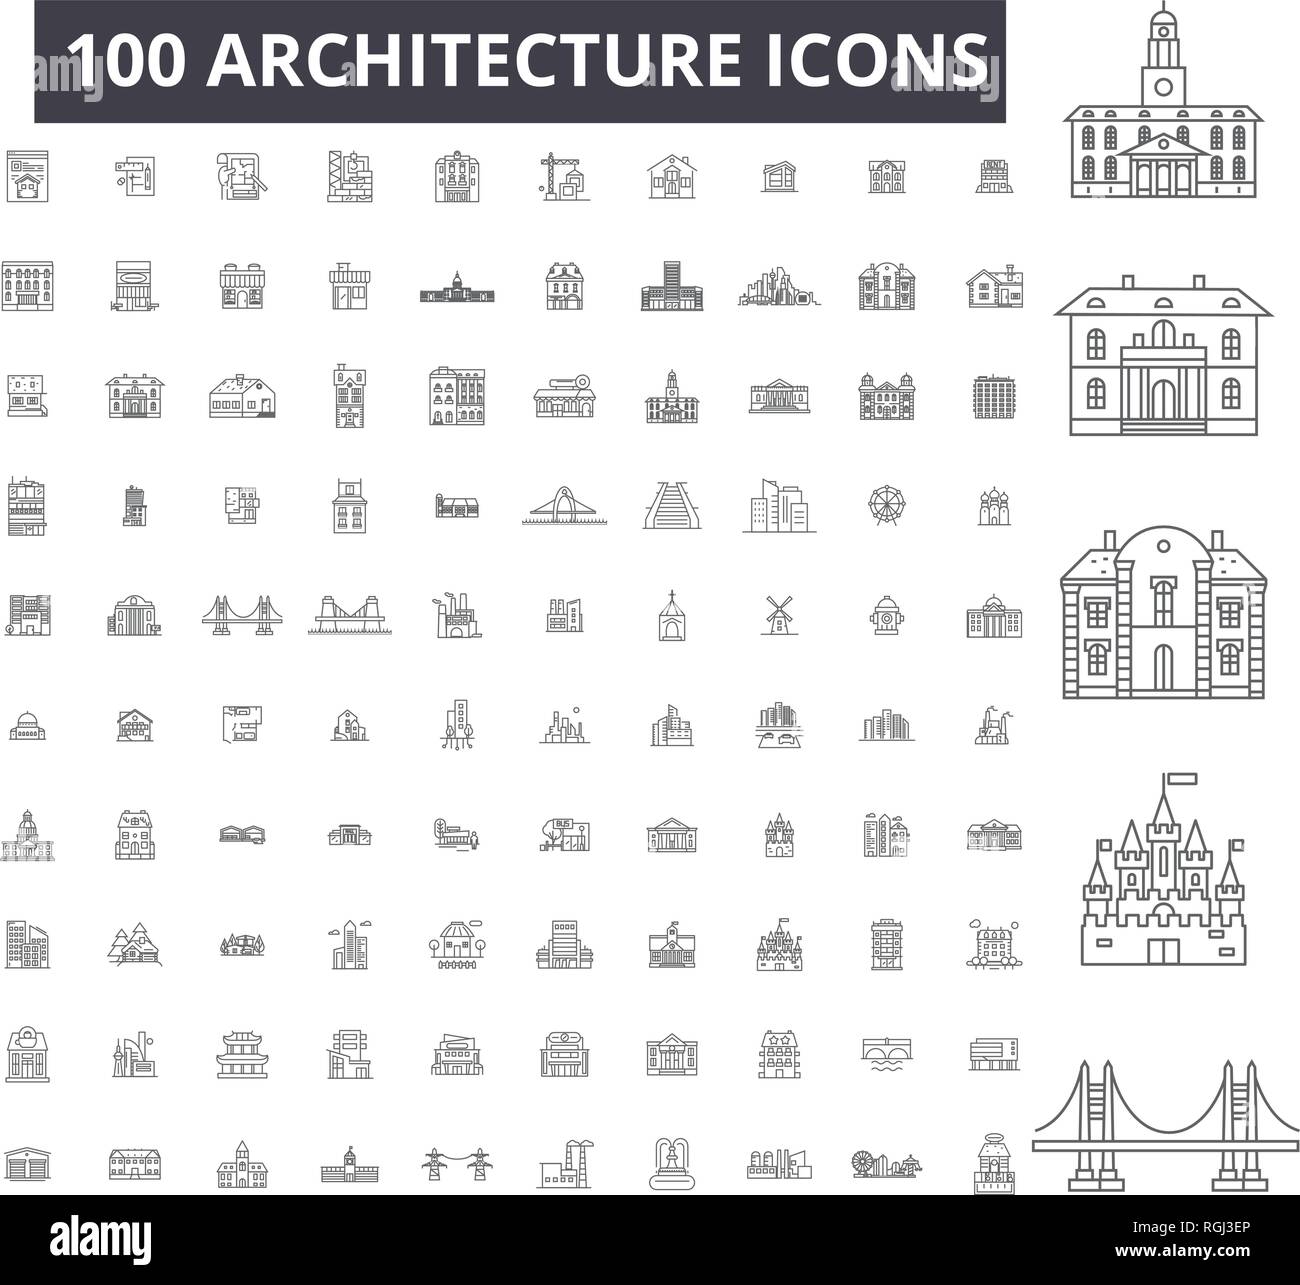 architecture icons